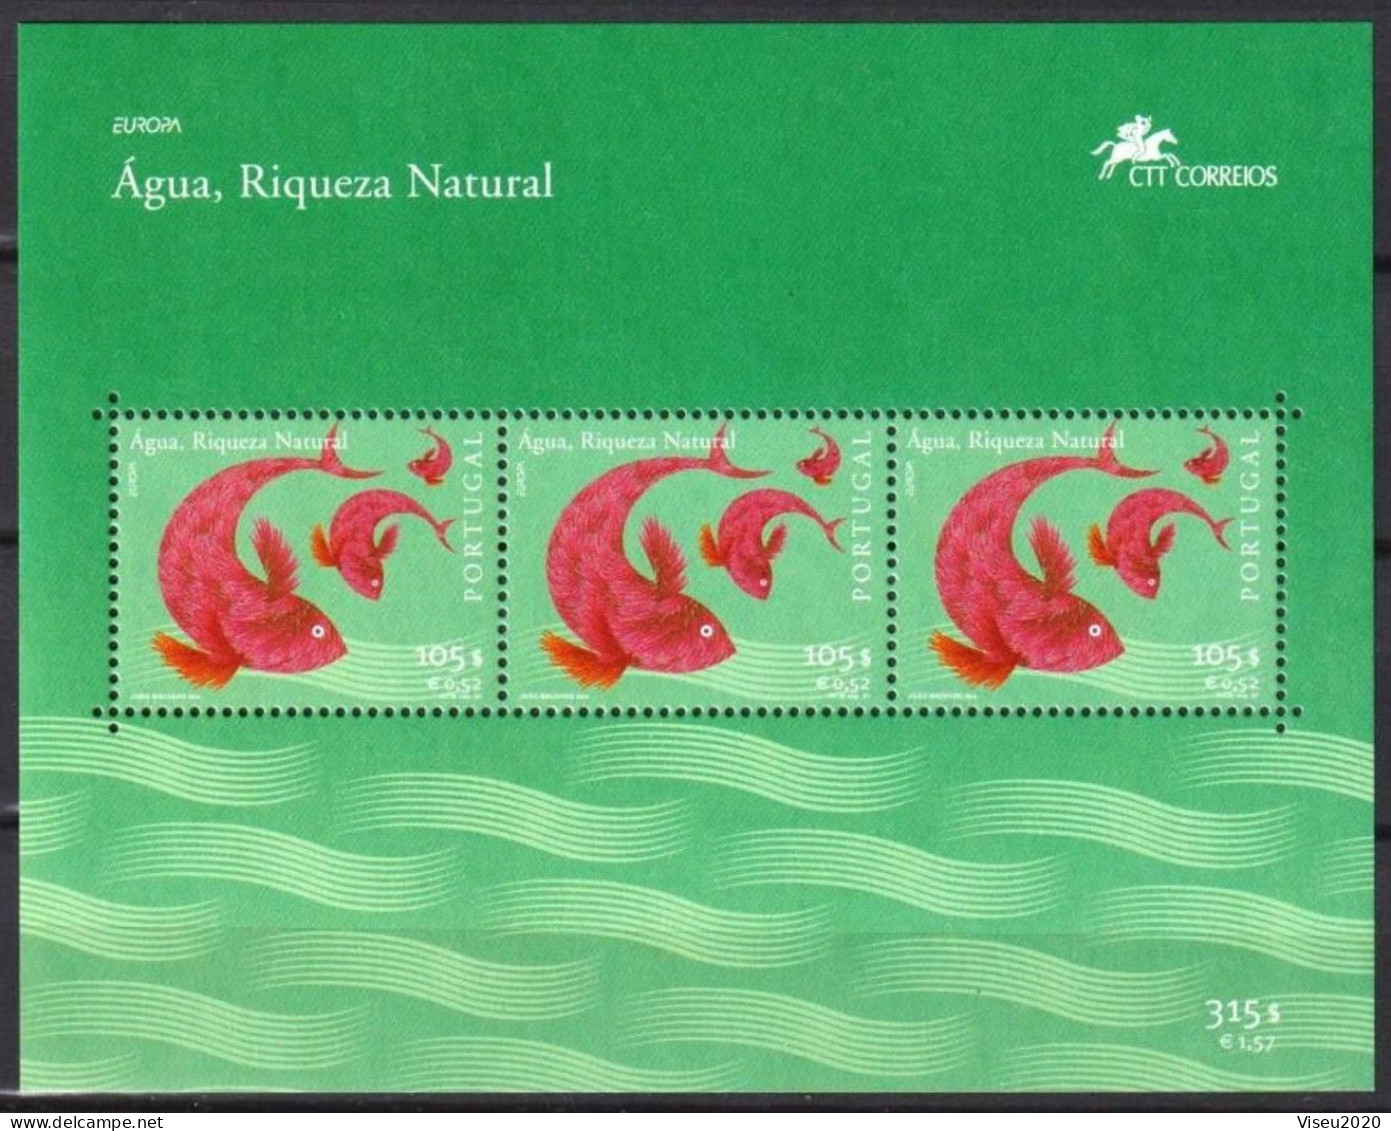 Portugal 2001 Afinsa 2771 Europoa CEPT - Water Treasure Of Nature Bloco Af 240 - MNH - Unused Stamps